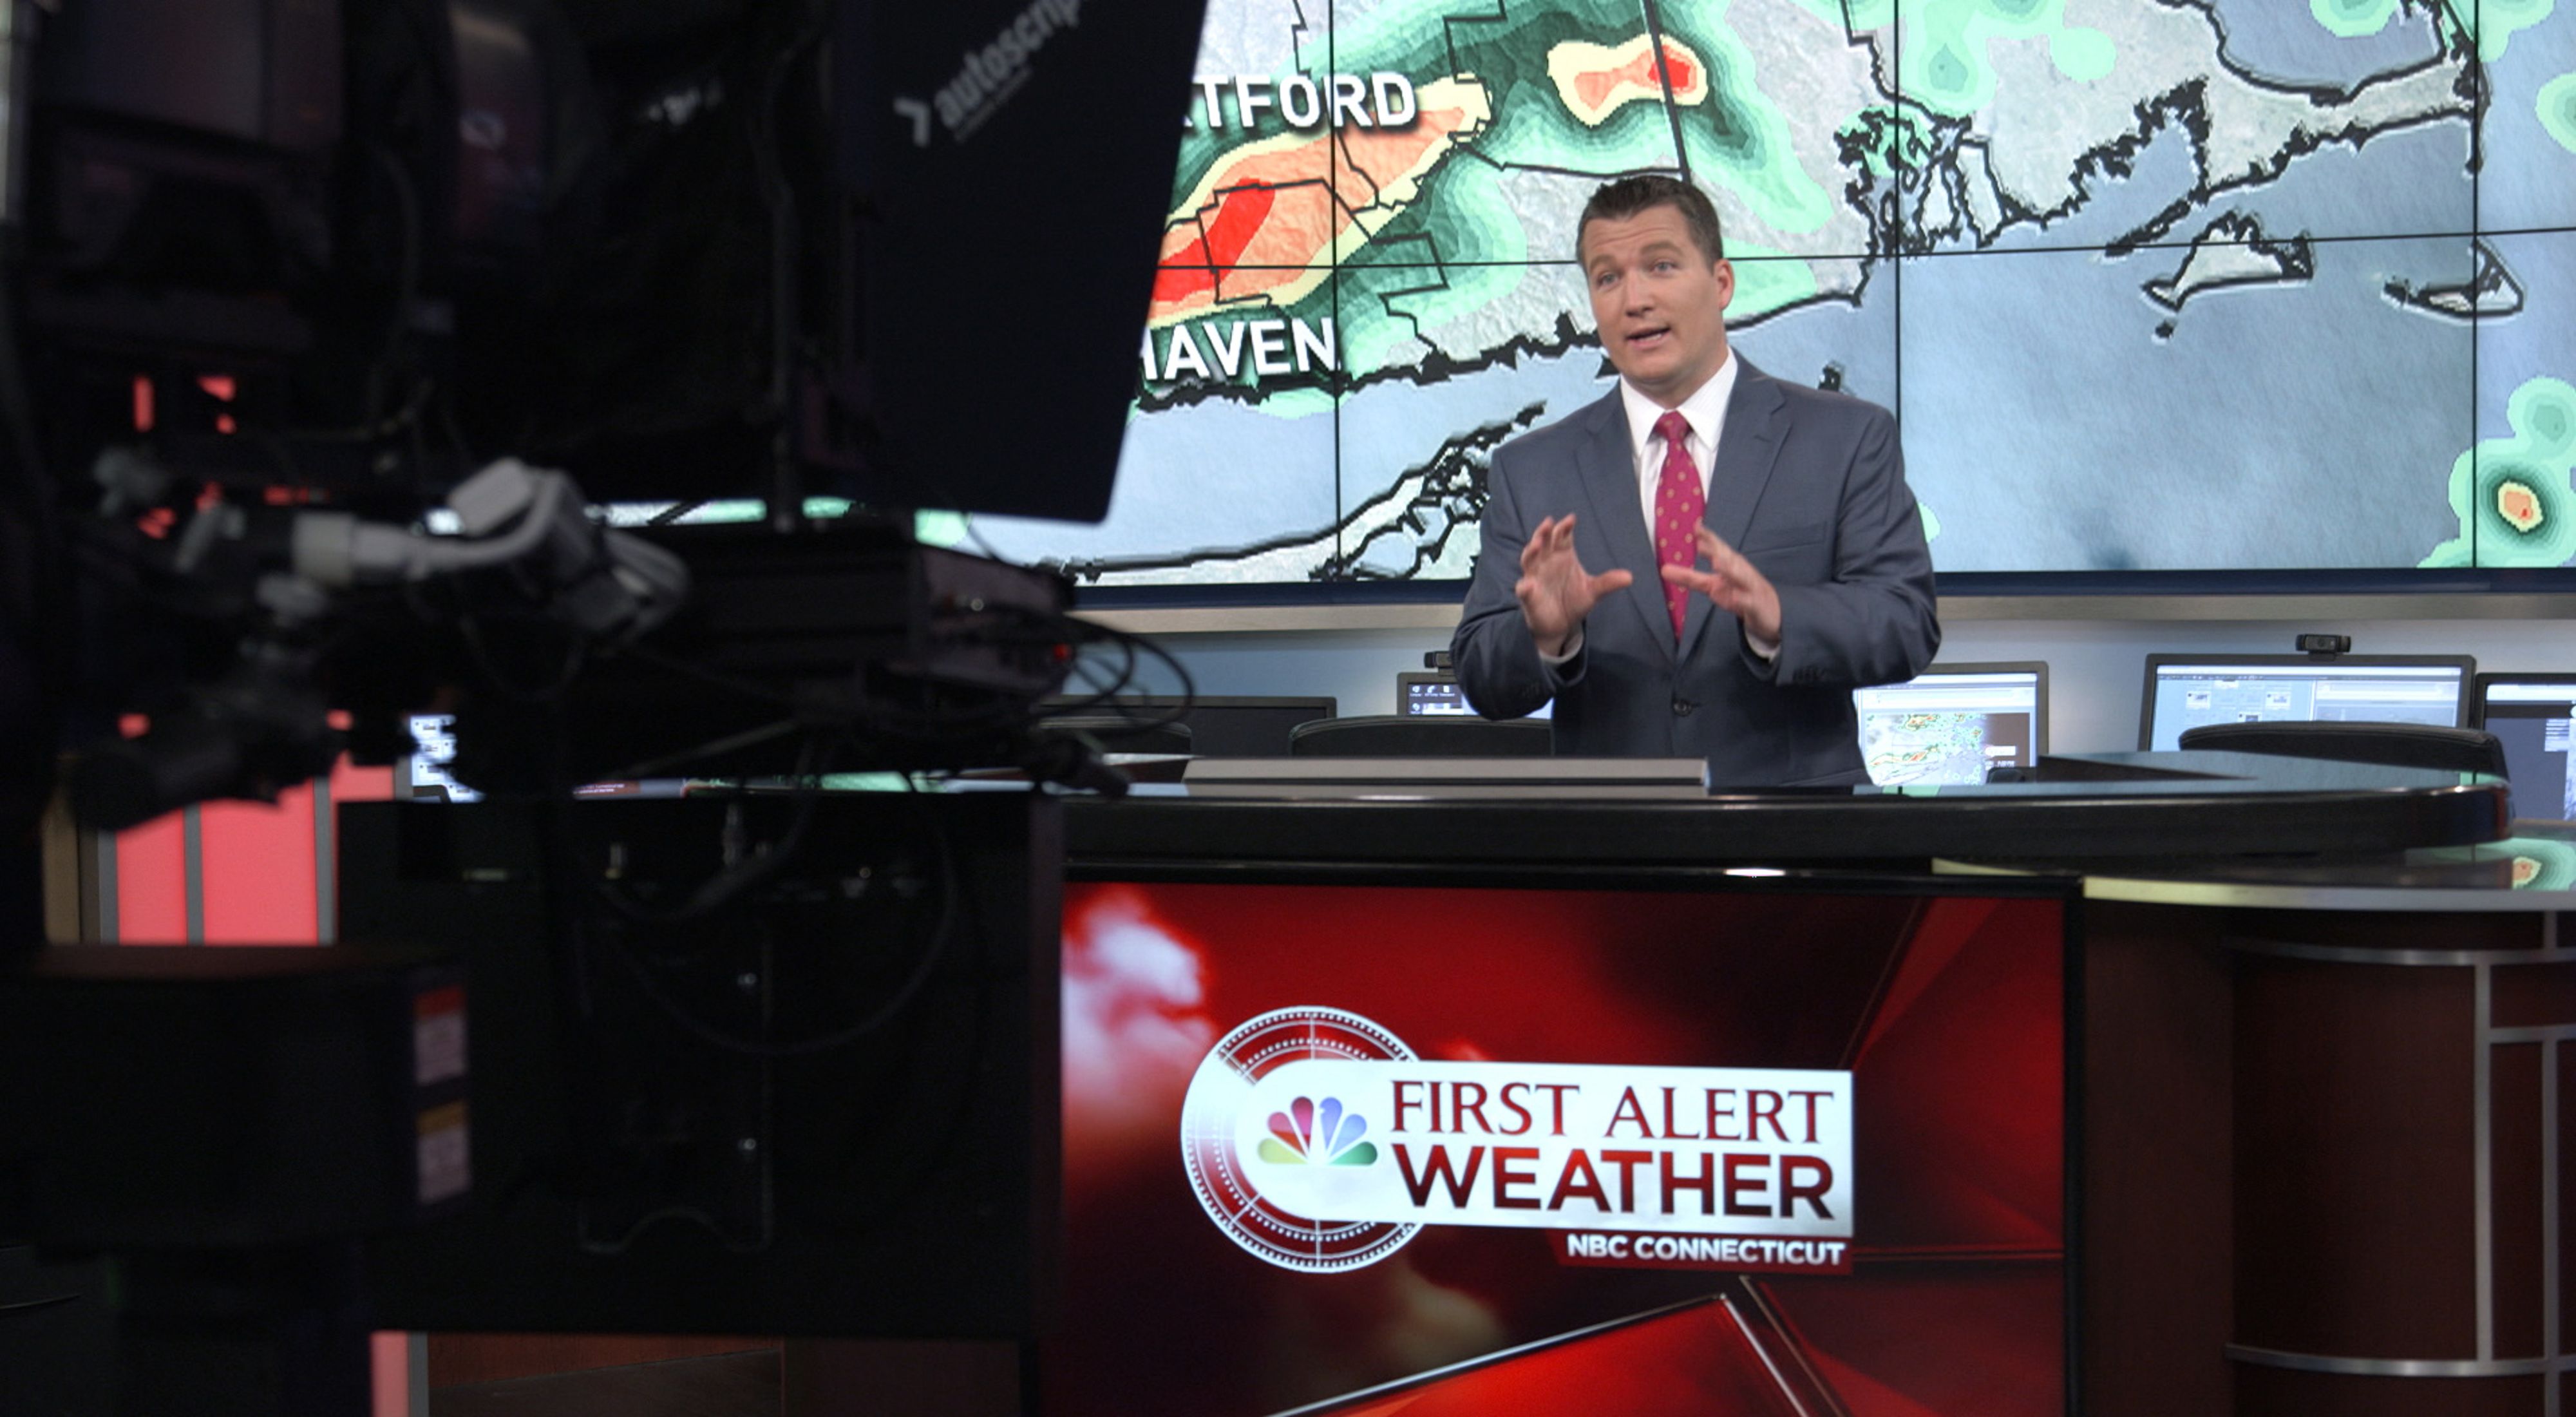 NBC Connecticut Chief Meteorologist Ryan Hanrahan delivering a forecast.